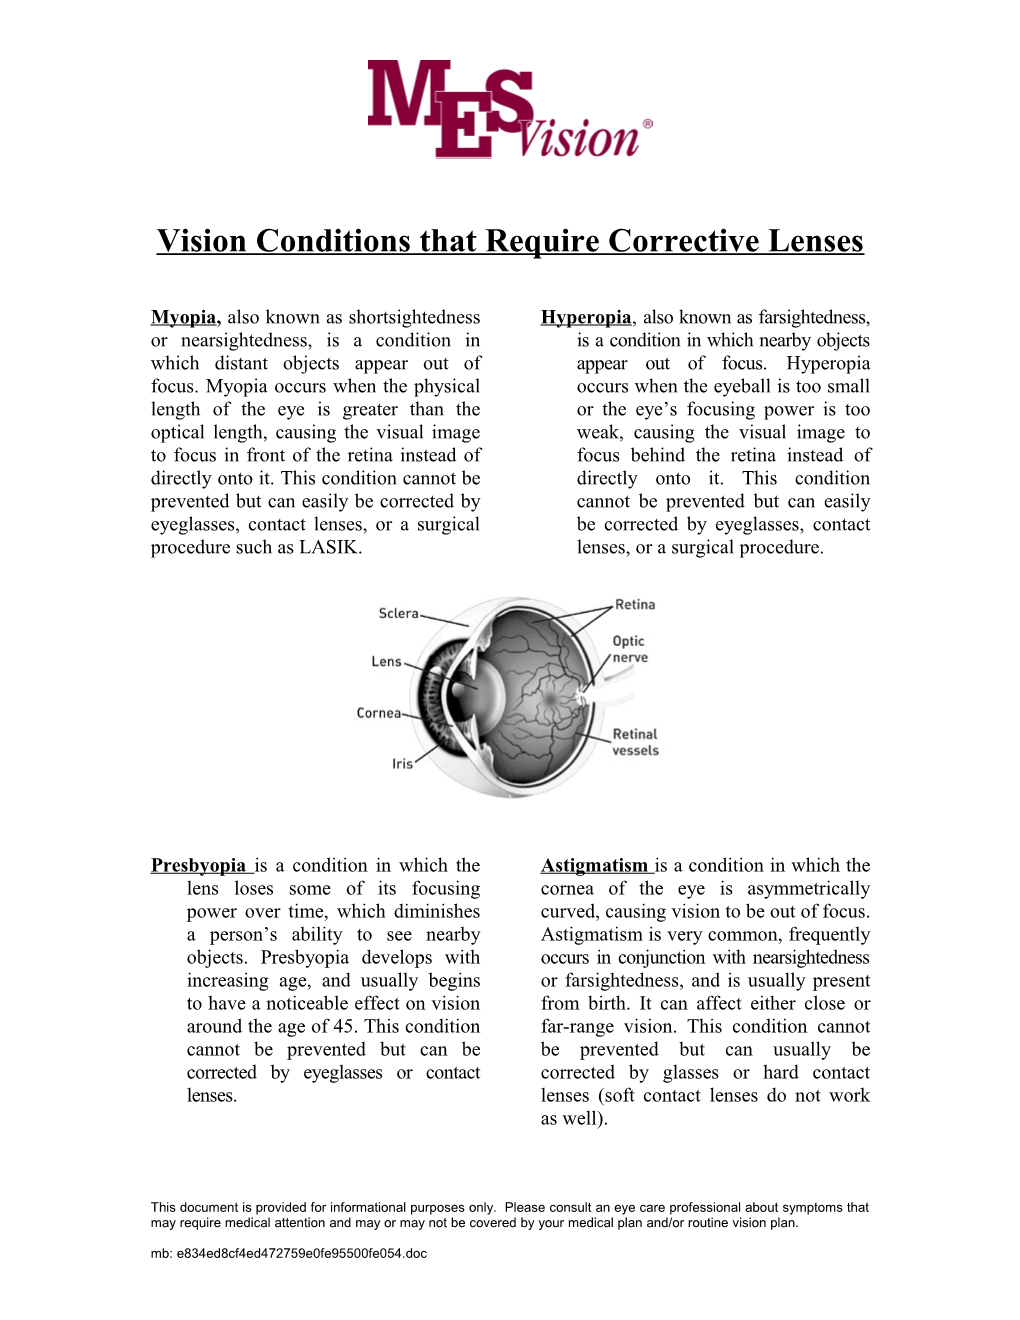 Vision Conditions That Require Corrective Lenses